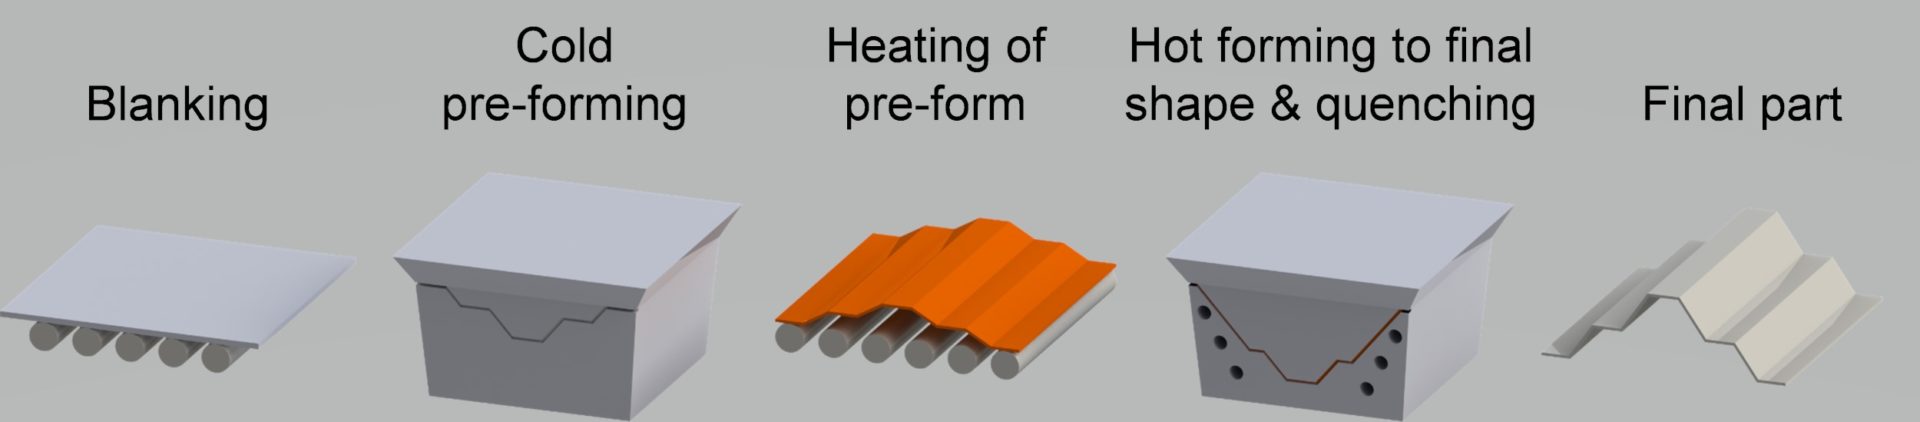 Figure 2: Summary of “hybrid process” where deformation is done both at cold and hot conditions.B-14